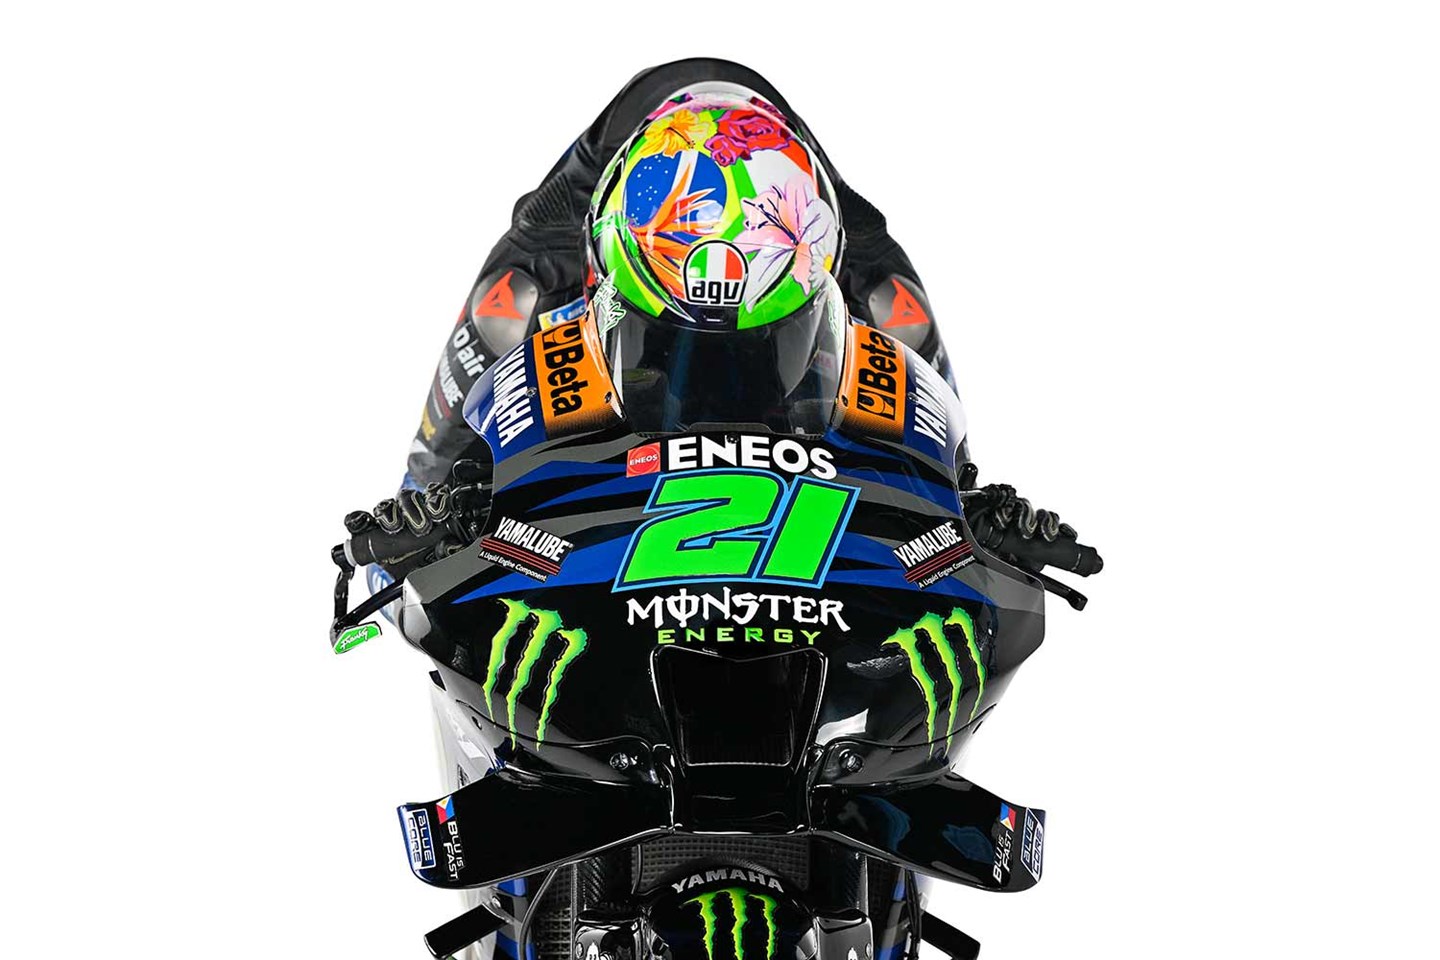 Yamaha first MotoGP team to unveil 2023 livery ahead of new season